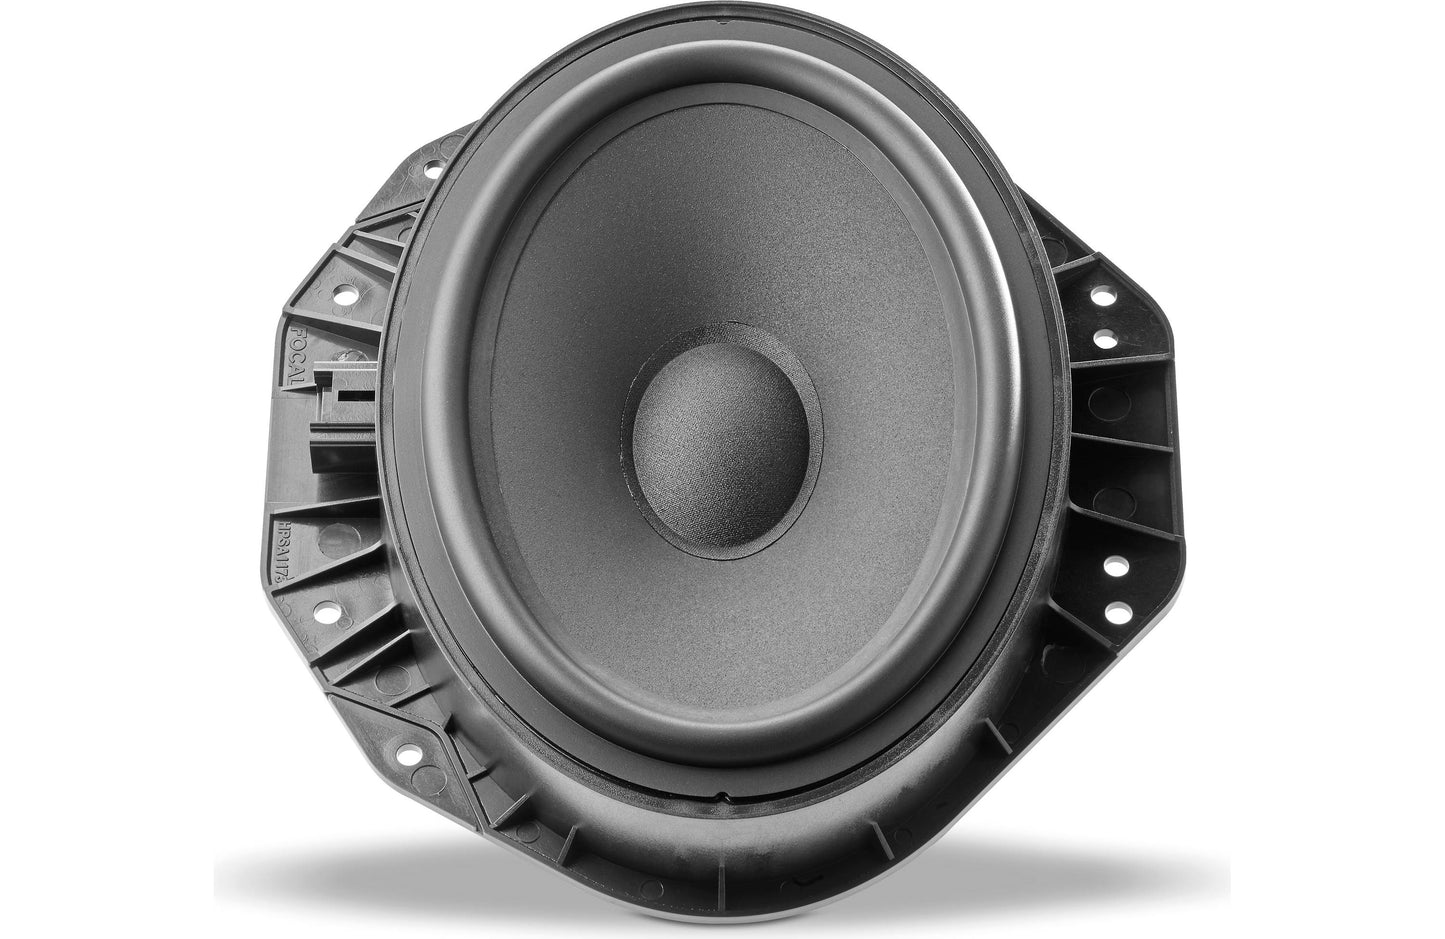 Focal Inside IS FORD 690 6"x9" component speaker system for select Ford and Lincoln vehicles